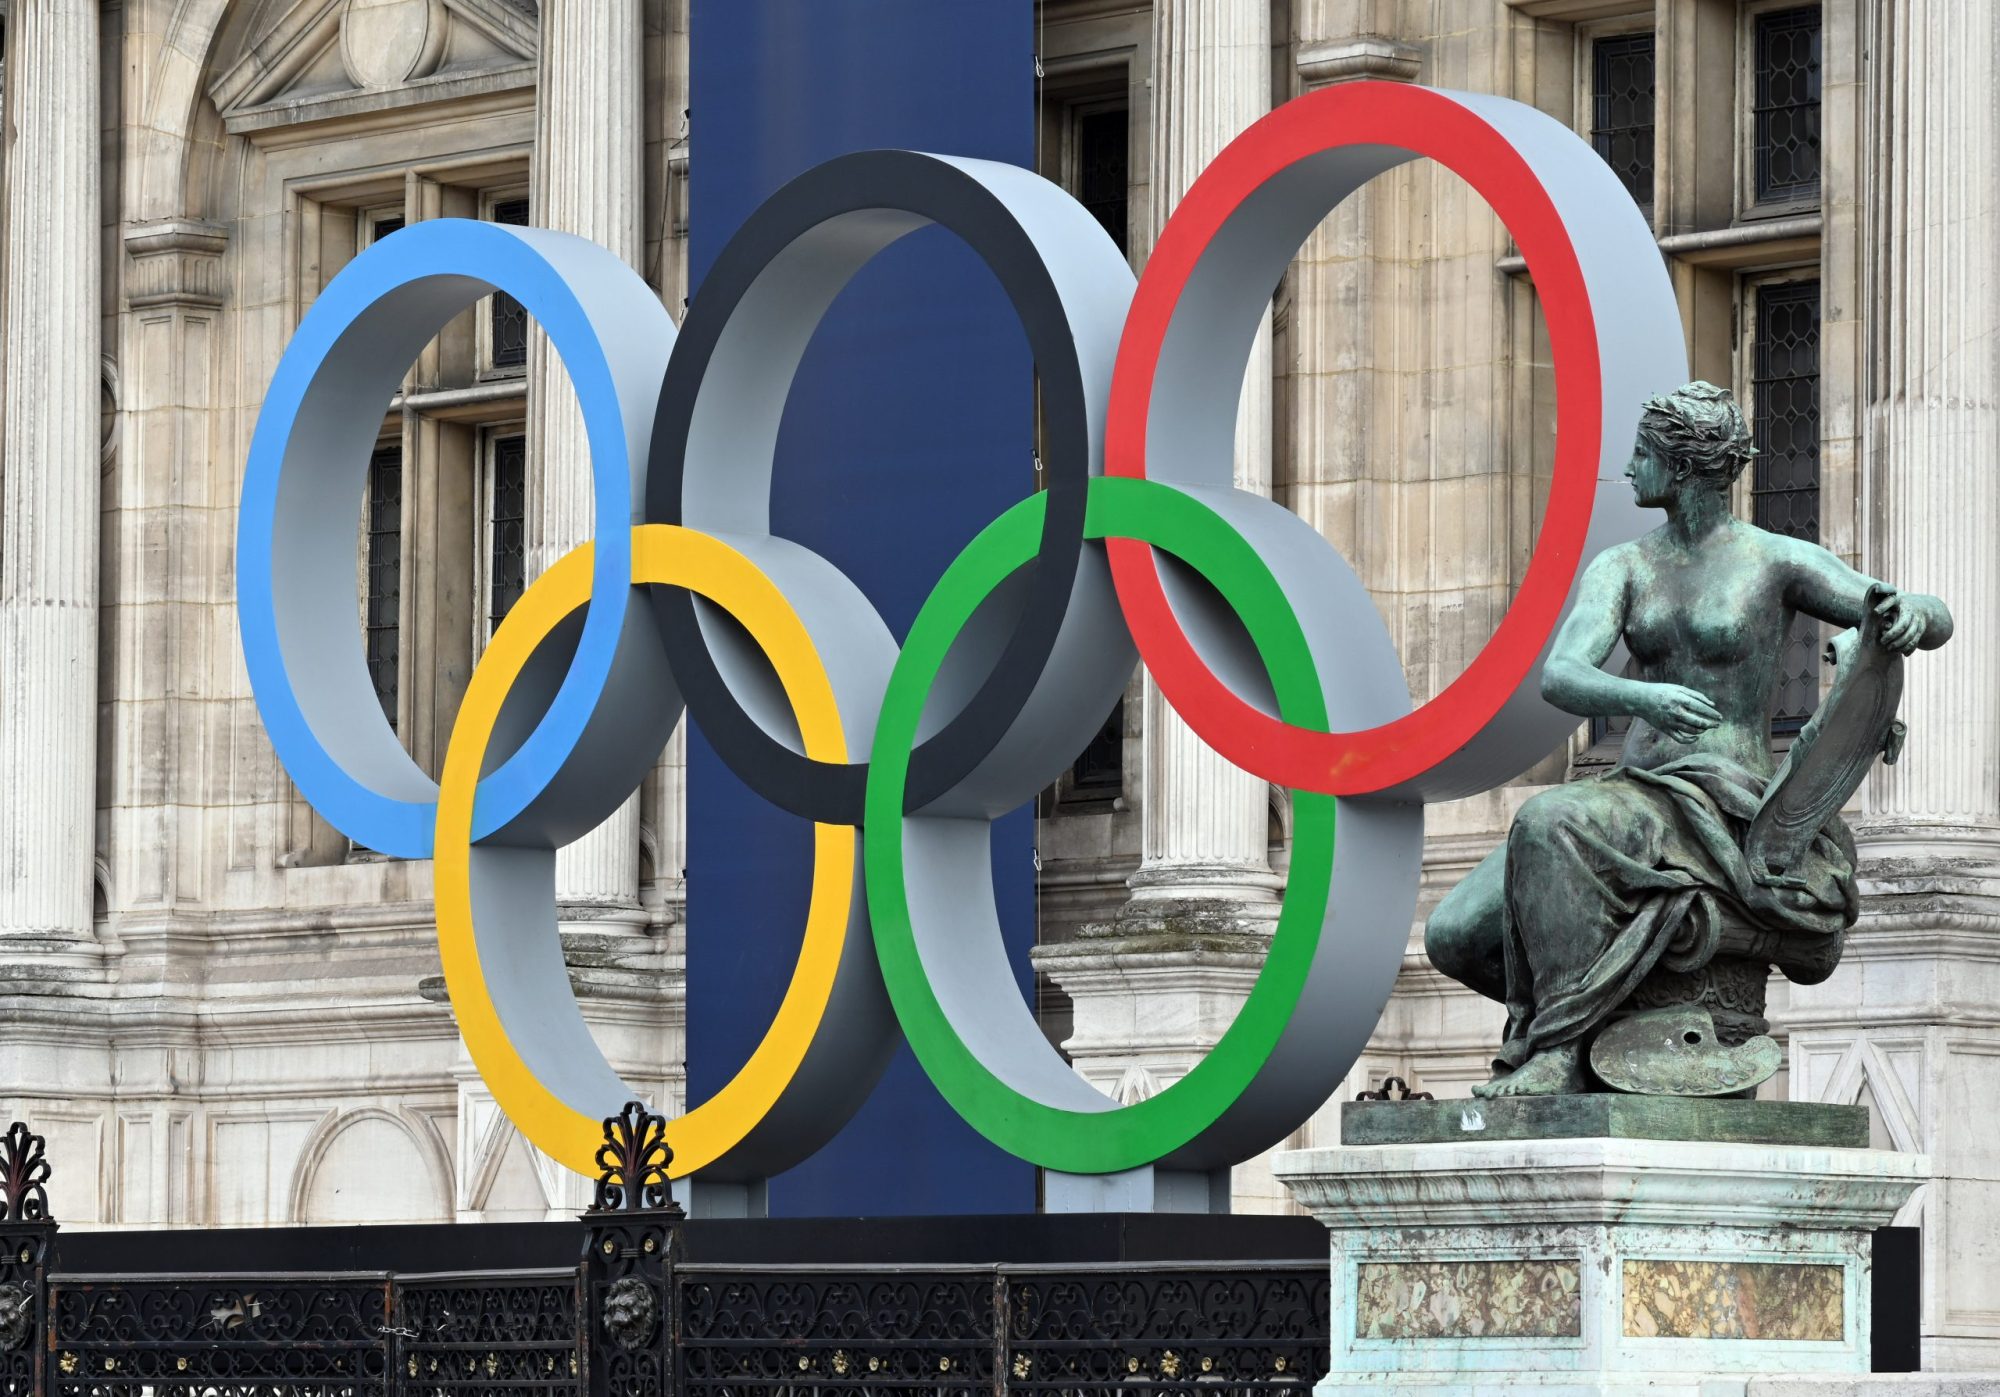 The five olympic rings displayed in front of a copper statue of an angel